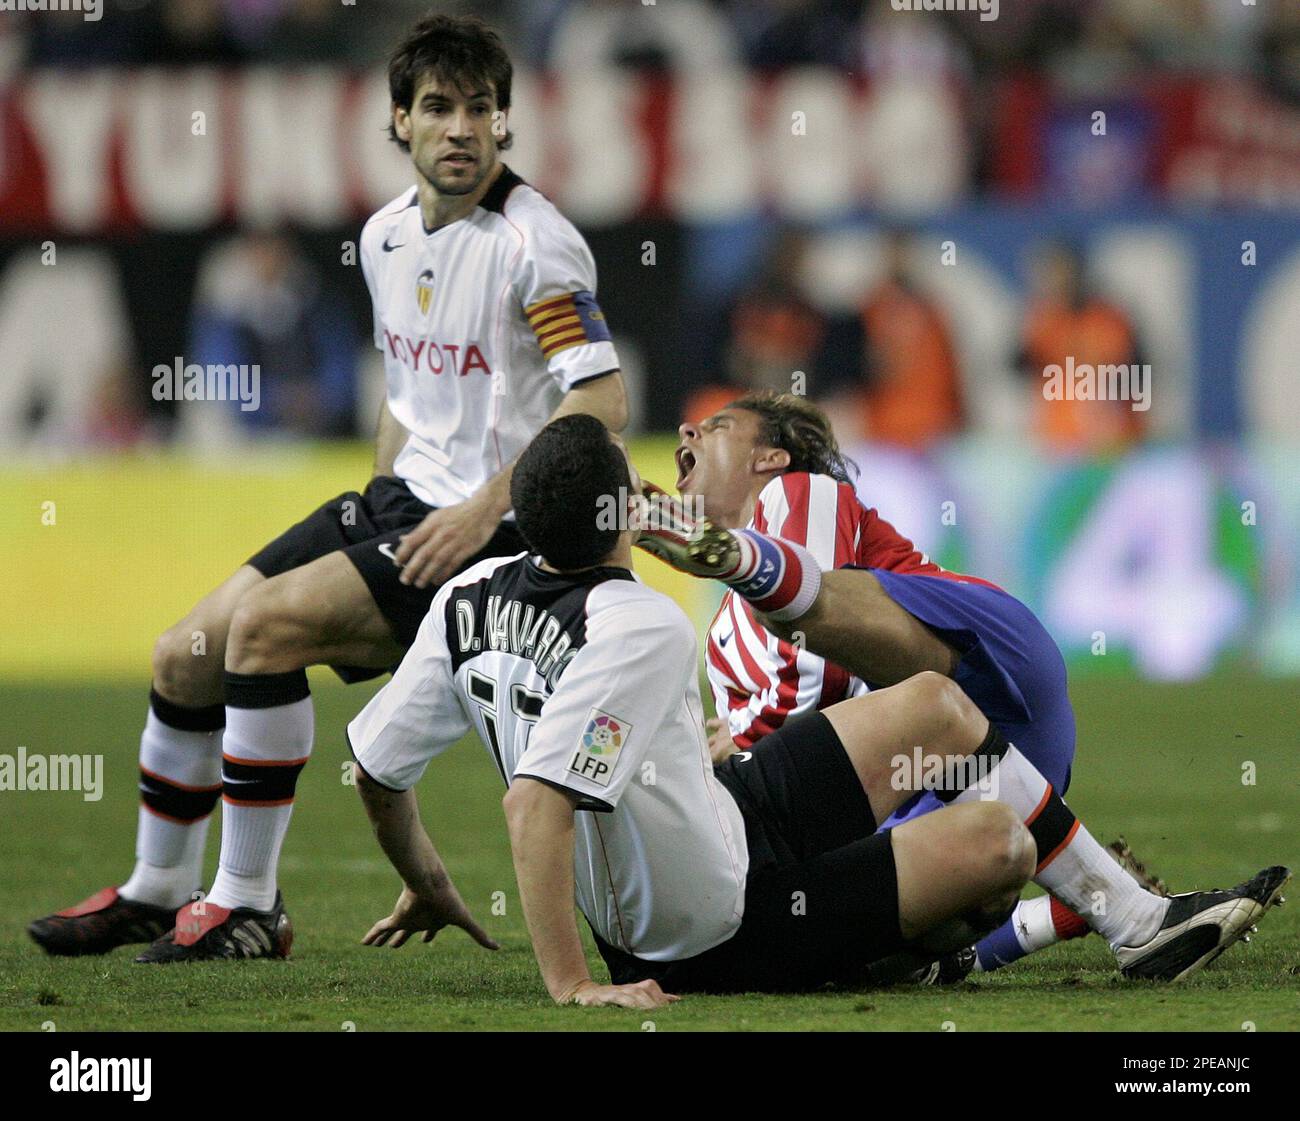 Atletico de Madrid player Richard Nunez from Uruguay, right, collides with Valencia player David Navarro Pedros from Spain, center, as Valencia team captain David Albelda Aliques from Spain, left, looks on during their Spanish league soccer match in Madrid, Sunday, March 13, 2005. Nunez had to abandon the game with a knee injury. Atletico de Madrid won the match with 1-0. (AP Photo/Jasper Juinen) ** EFE OUT ** Stock Photo